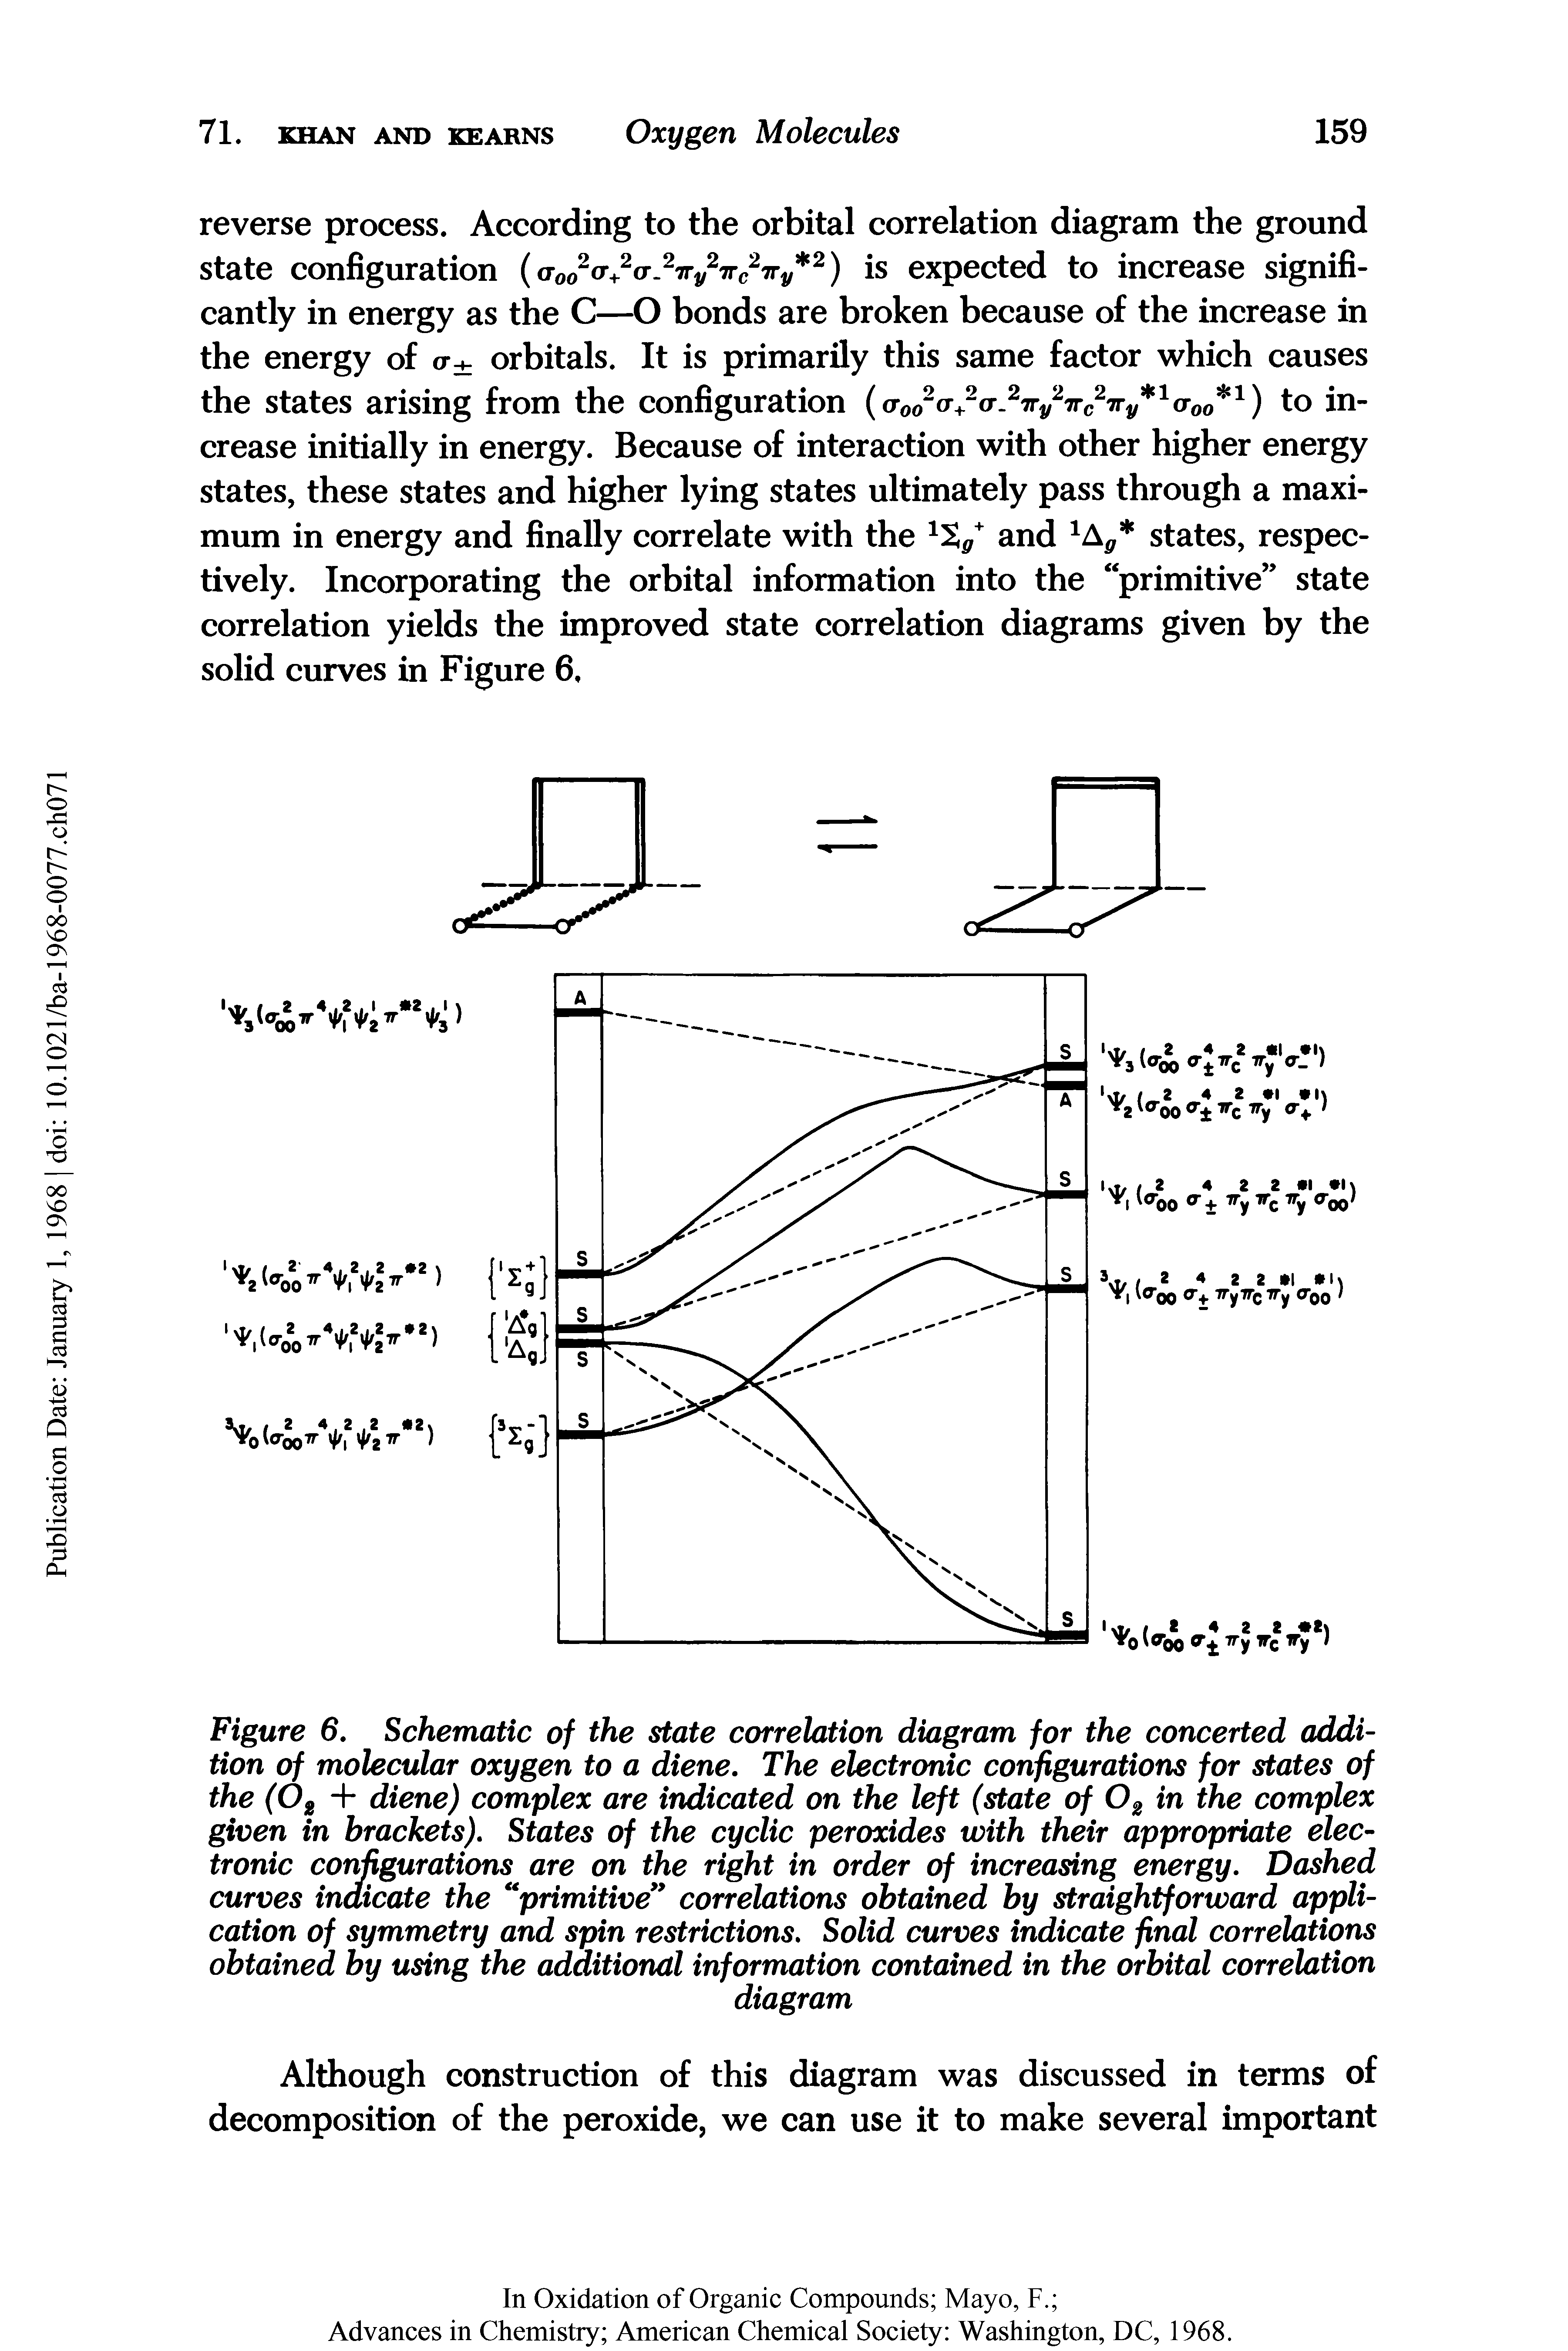 Figure 6. Schematic of the state correlation diagram for the concerted addition of molecular oxygen to a diene. The electronic configurations for states of the (O2 + diene) complex are indicated on the left (state of O2 in the complex given in brackets). States of the cyclic peroxides with their appropriate electronic configurations are on the right in order of increasing energy. Dashed curves indicate the primitive correlations obtained by straightforward application of symmetry and spin restrictions. Solid curves indicate final correlations obtained by using the additional information contained in the orbital correlation...